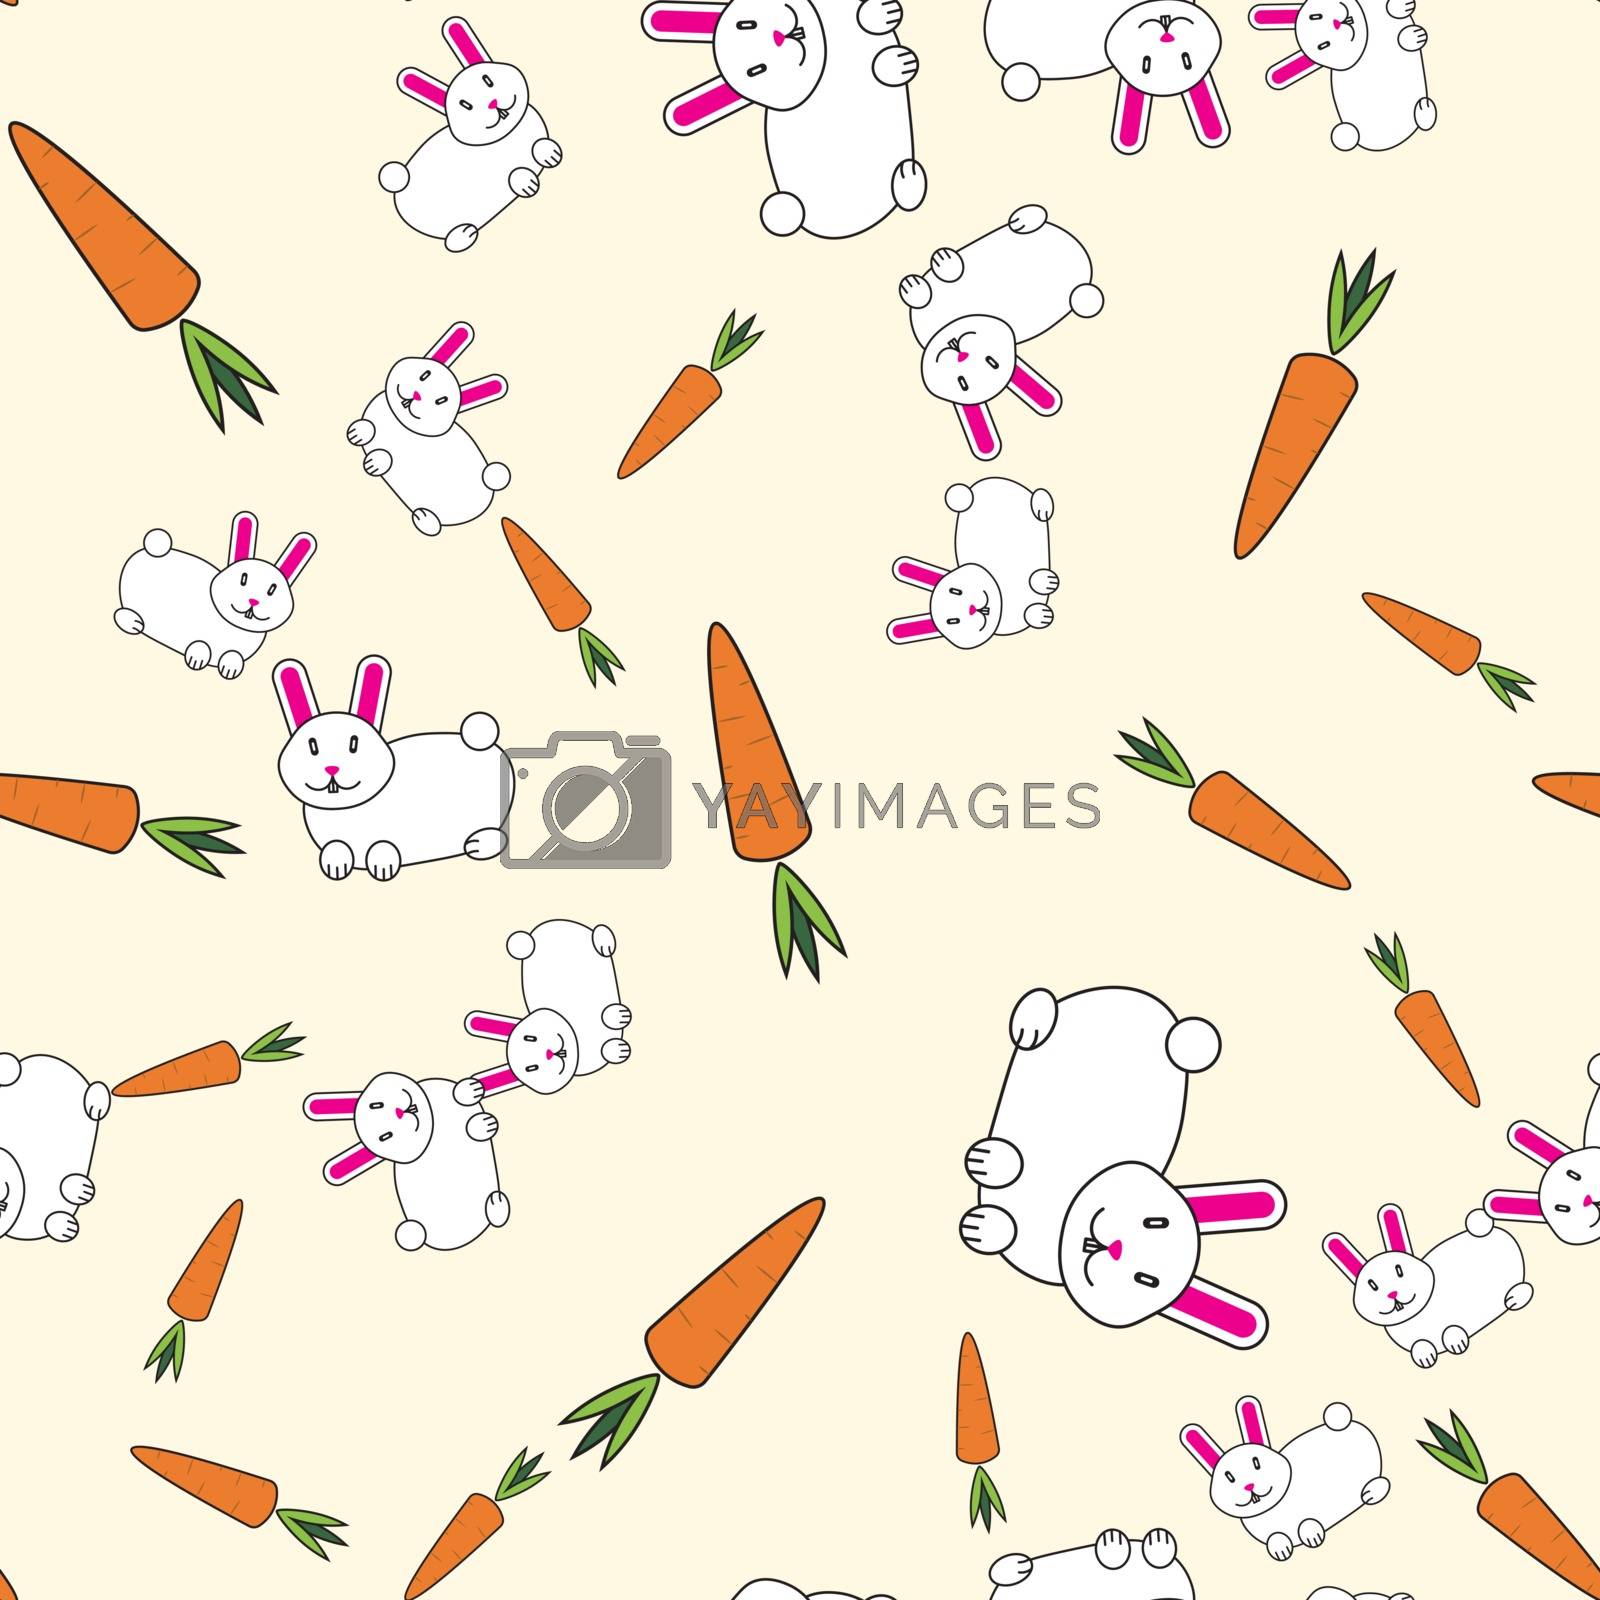 Royalty free image of Seamless vector pattern with rabbits and carrots by Musjaka